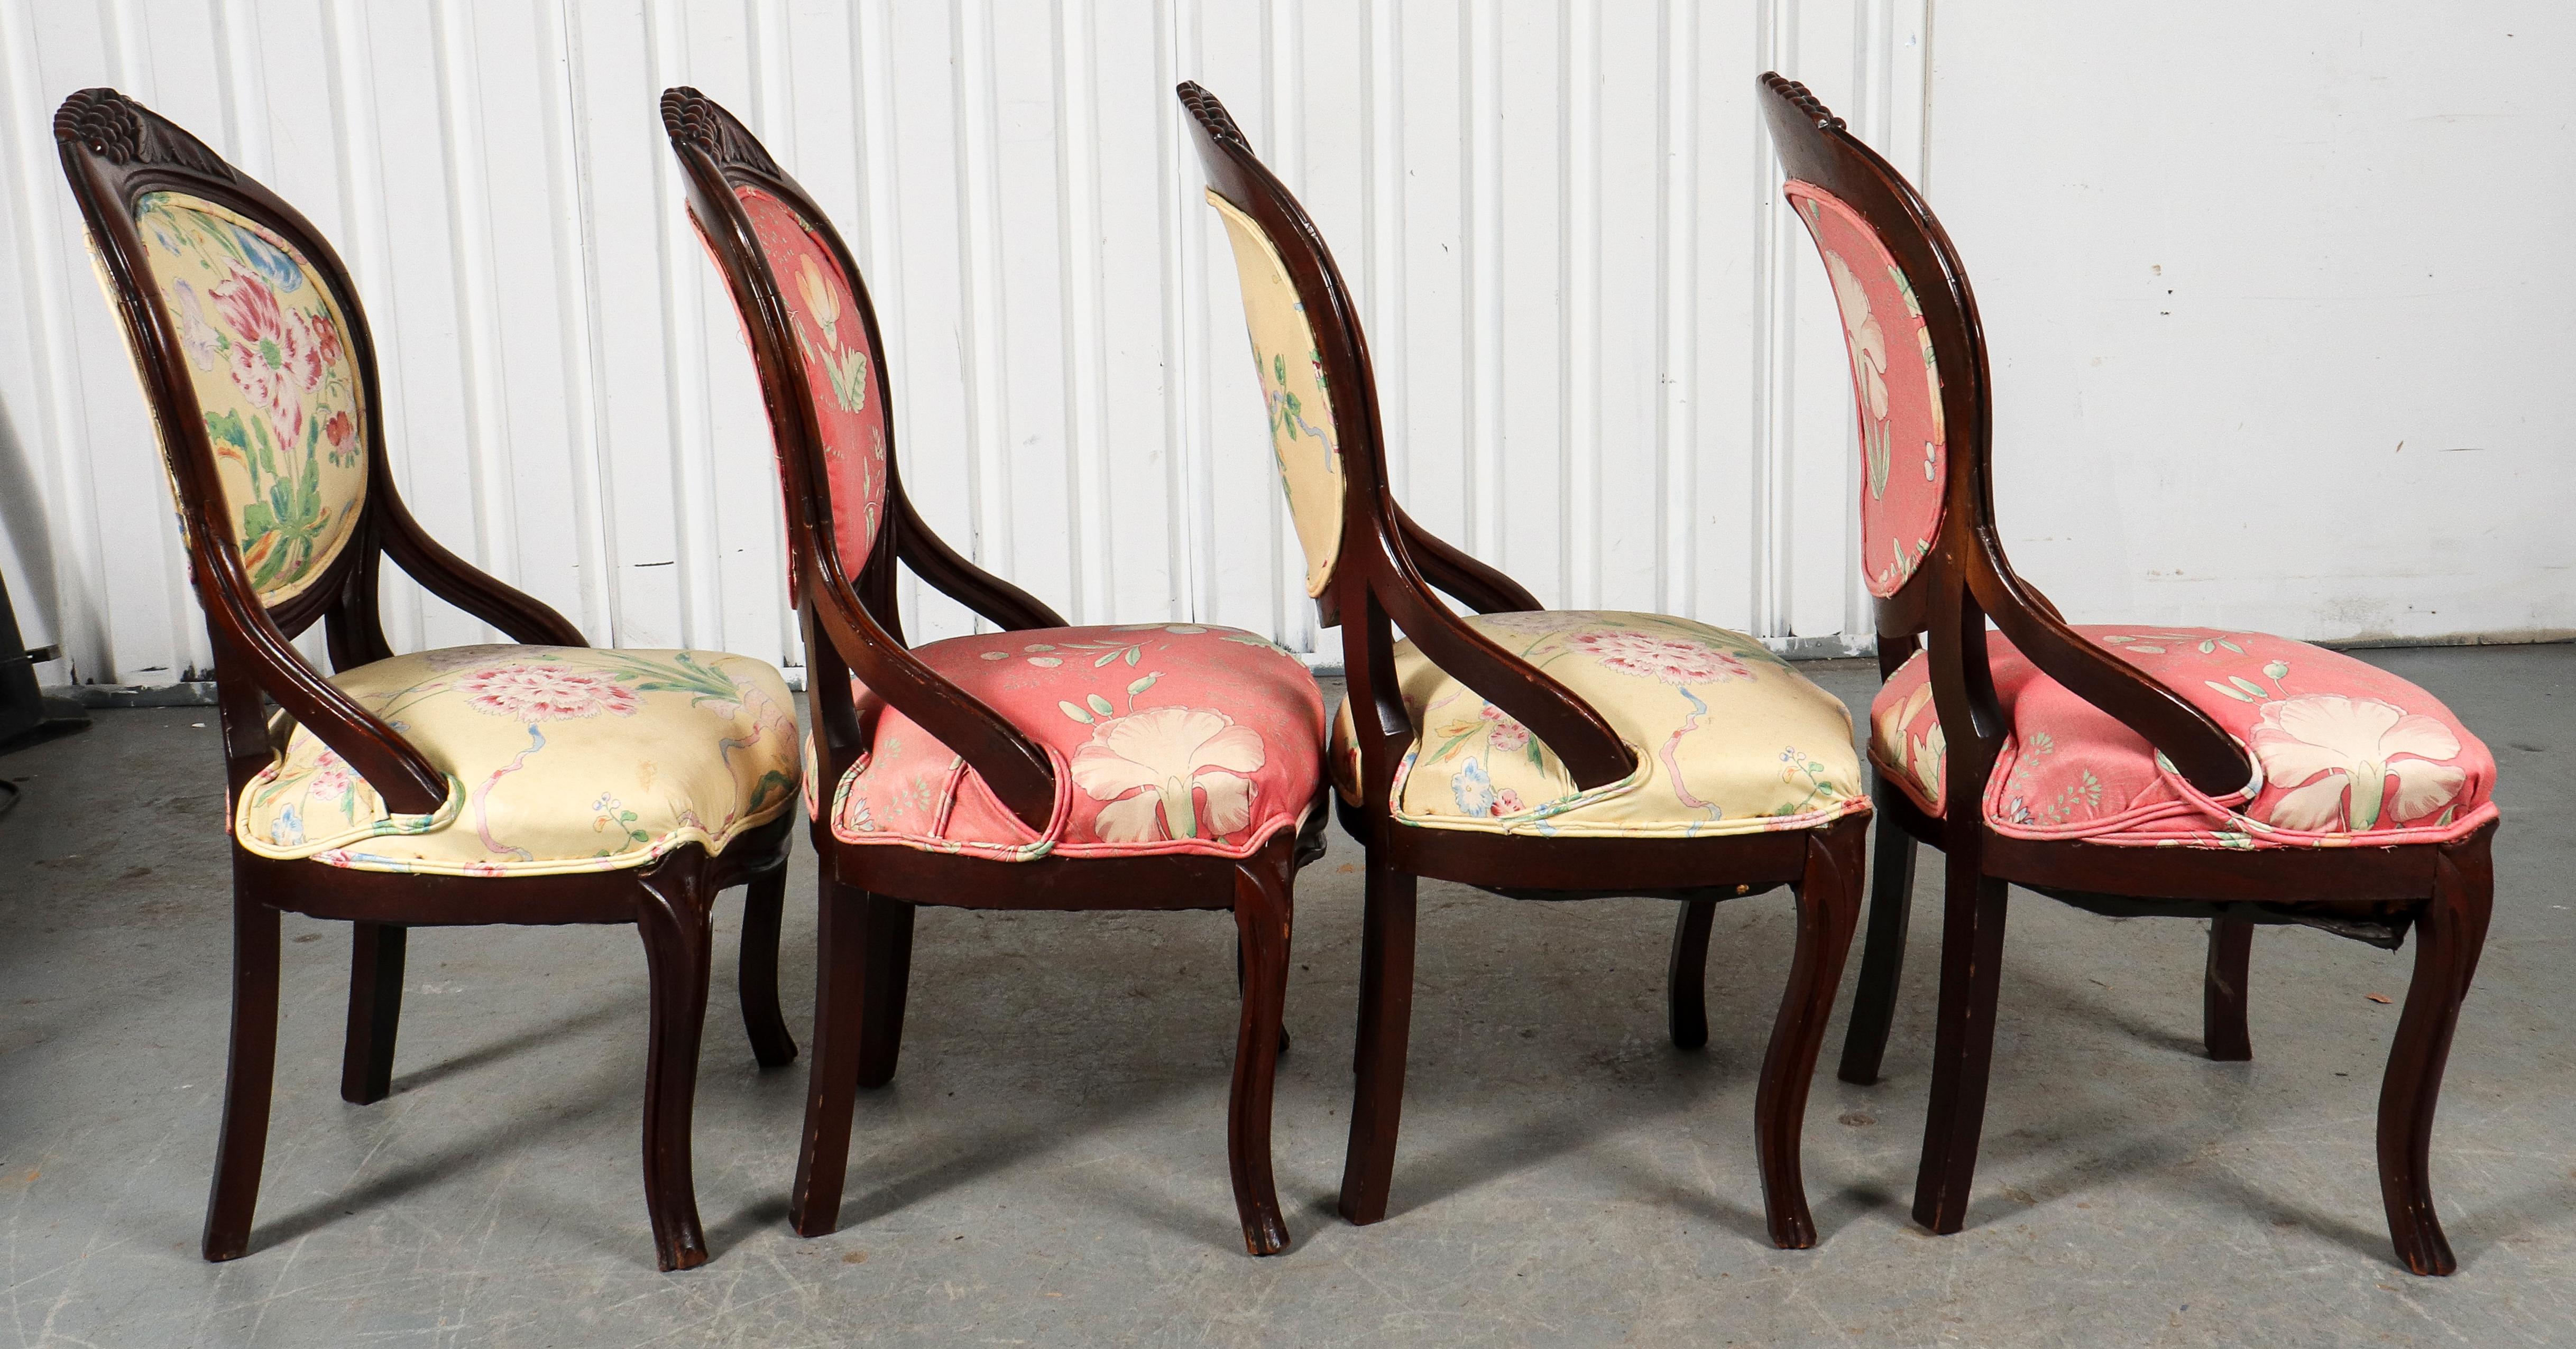 American Rococo Revival Style Wooden Chairs For Sale 1